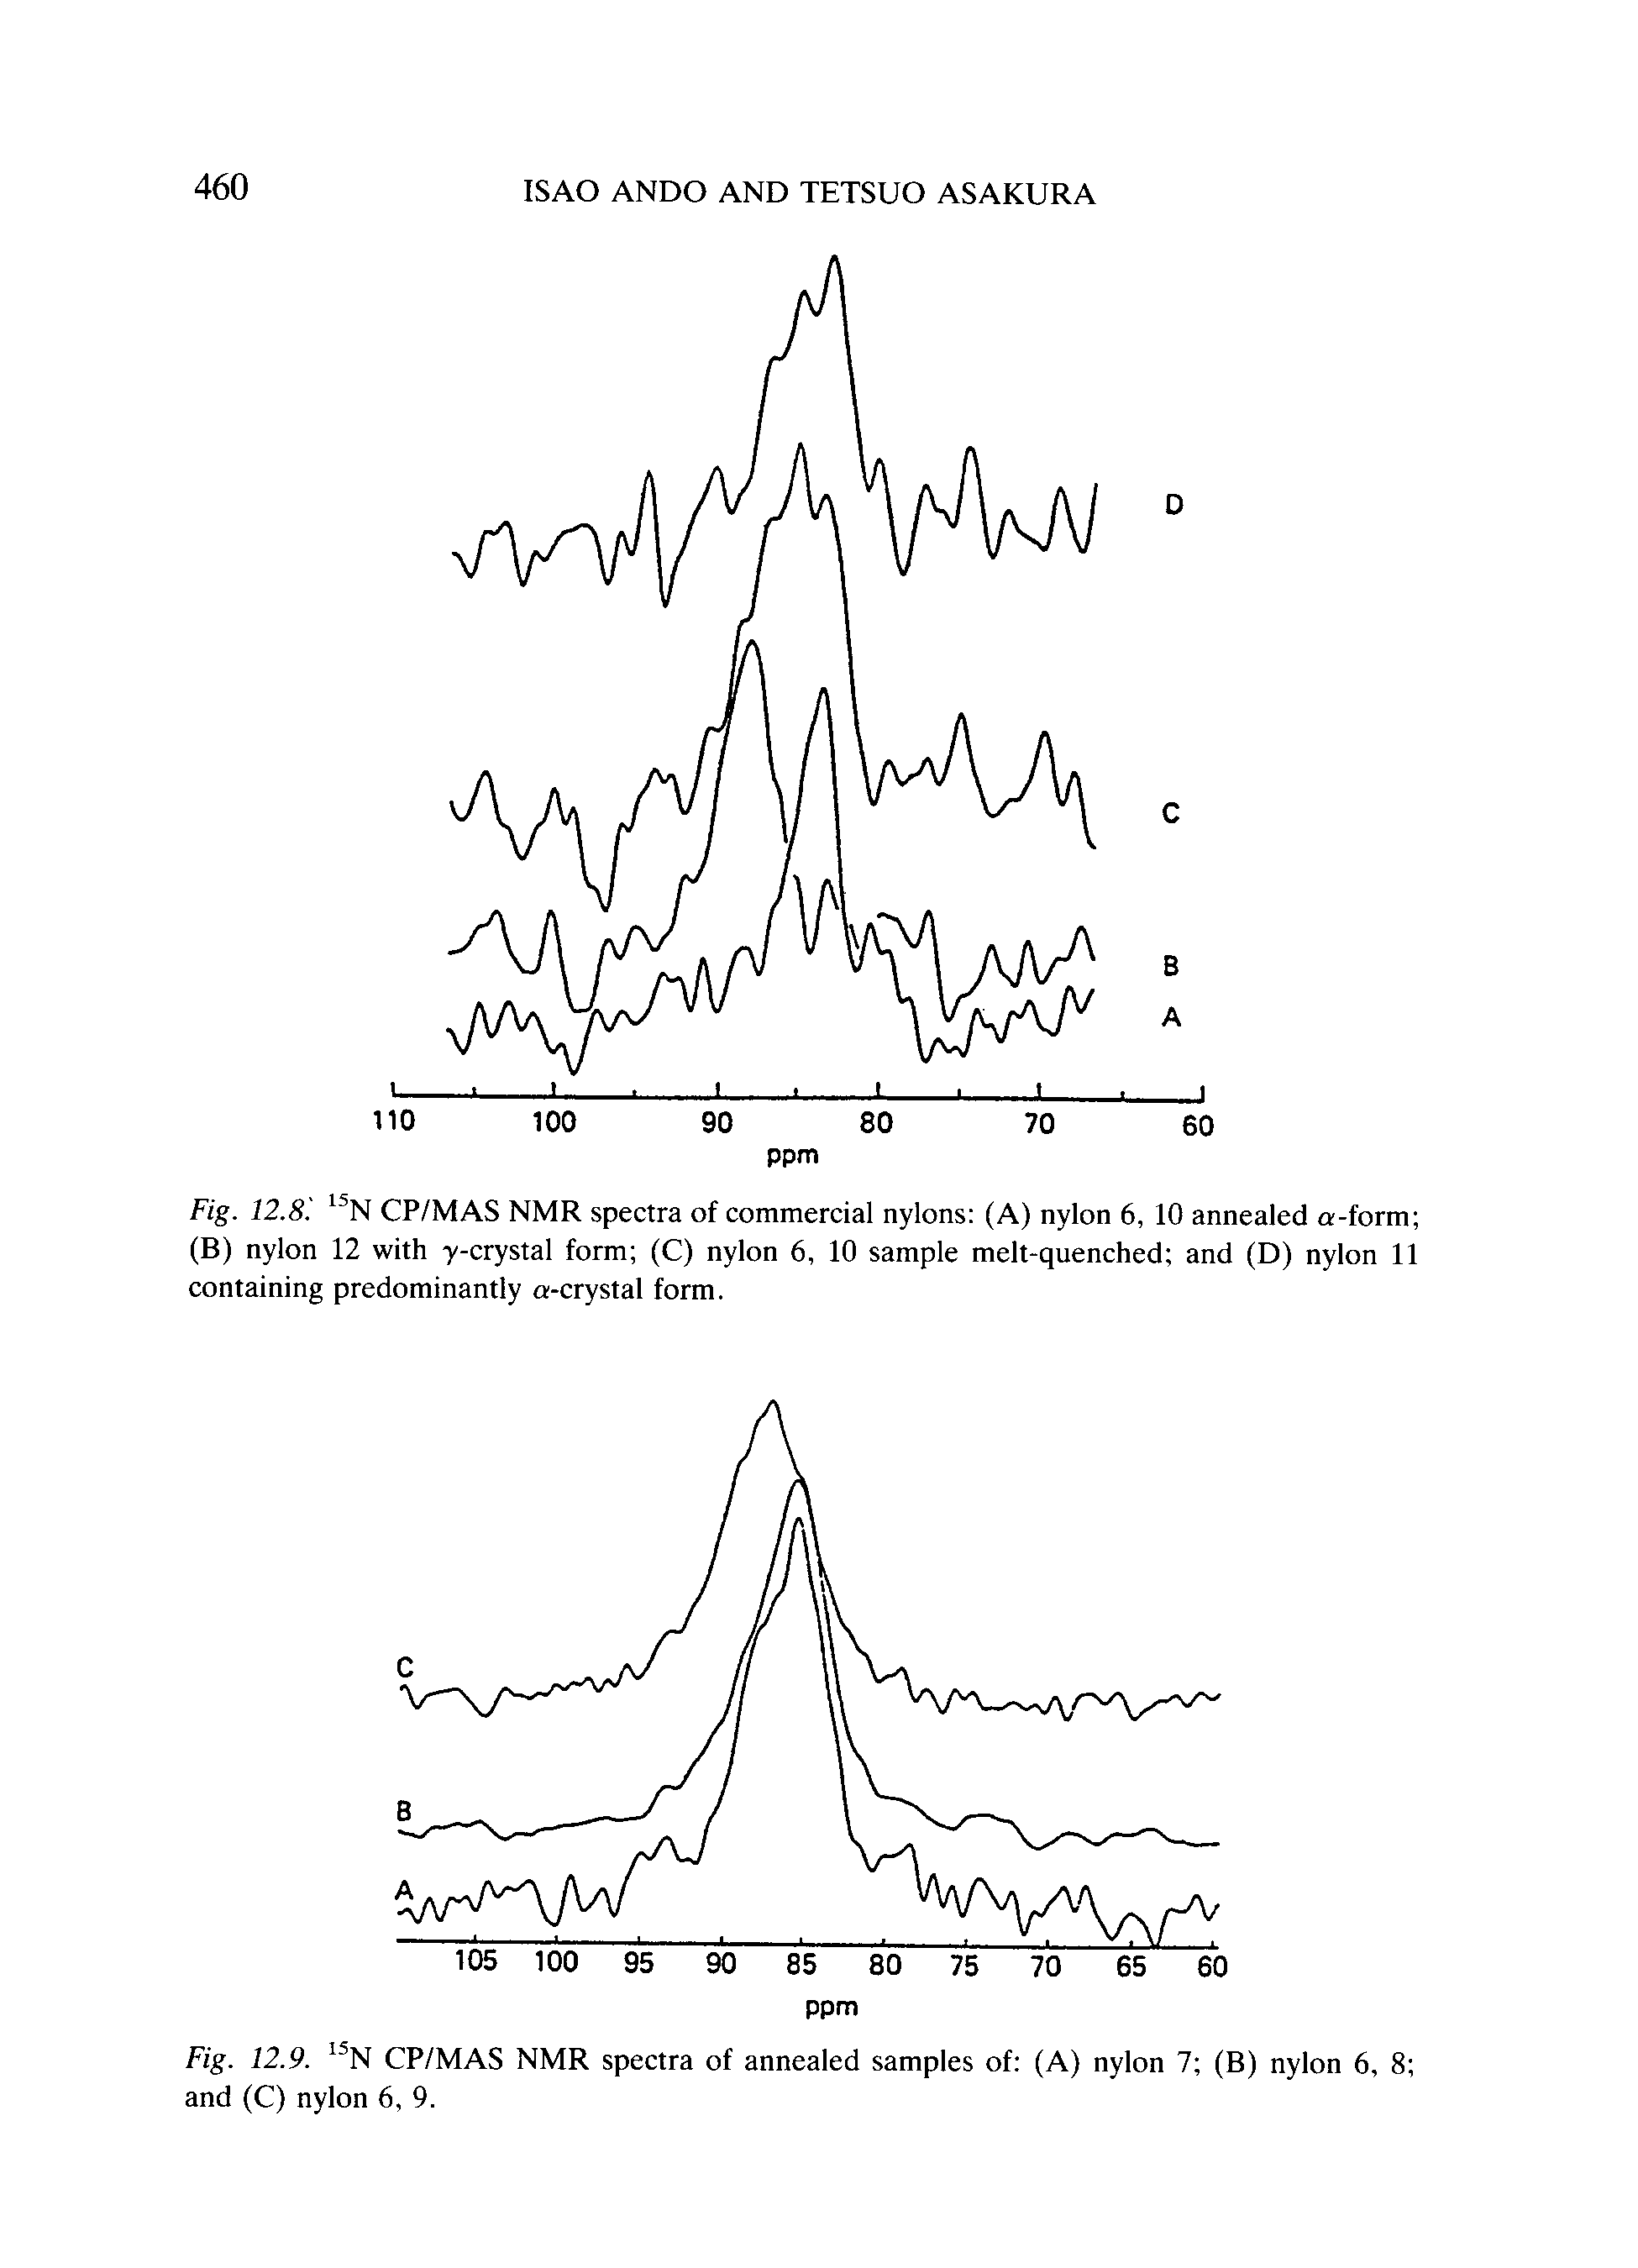 Fig. 12.8. N CP/MAS NMR spectra of commercial nylons (A) nylon 6, 10 annealed a-form (B) nylon 12 with y-crystal form (C) nylon 6, 10 sample melt-quenched and (D) nylon 11 containing predominantly a-crystal form.